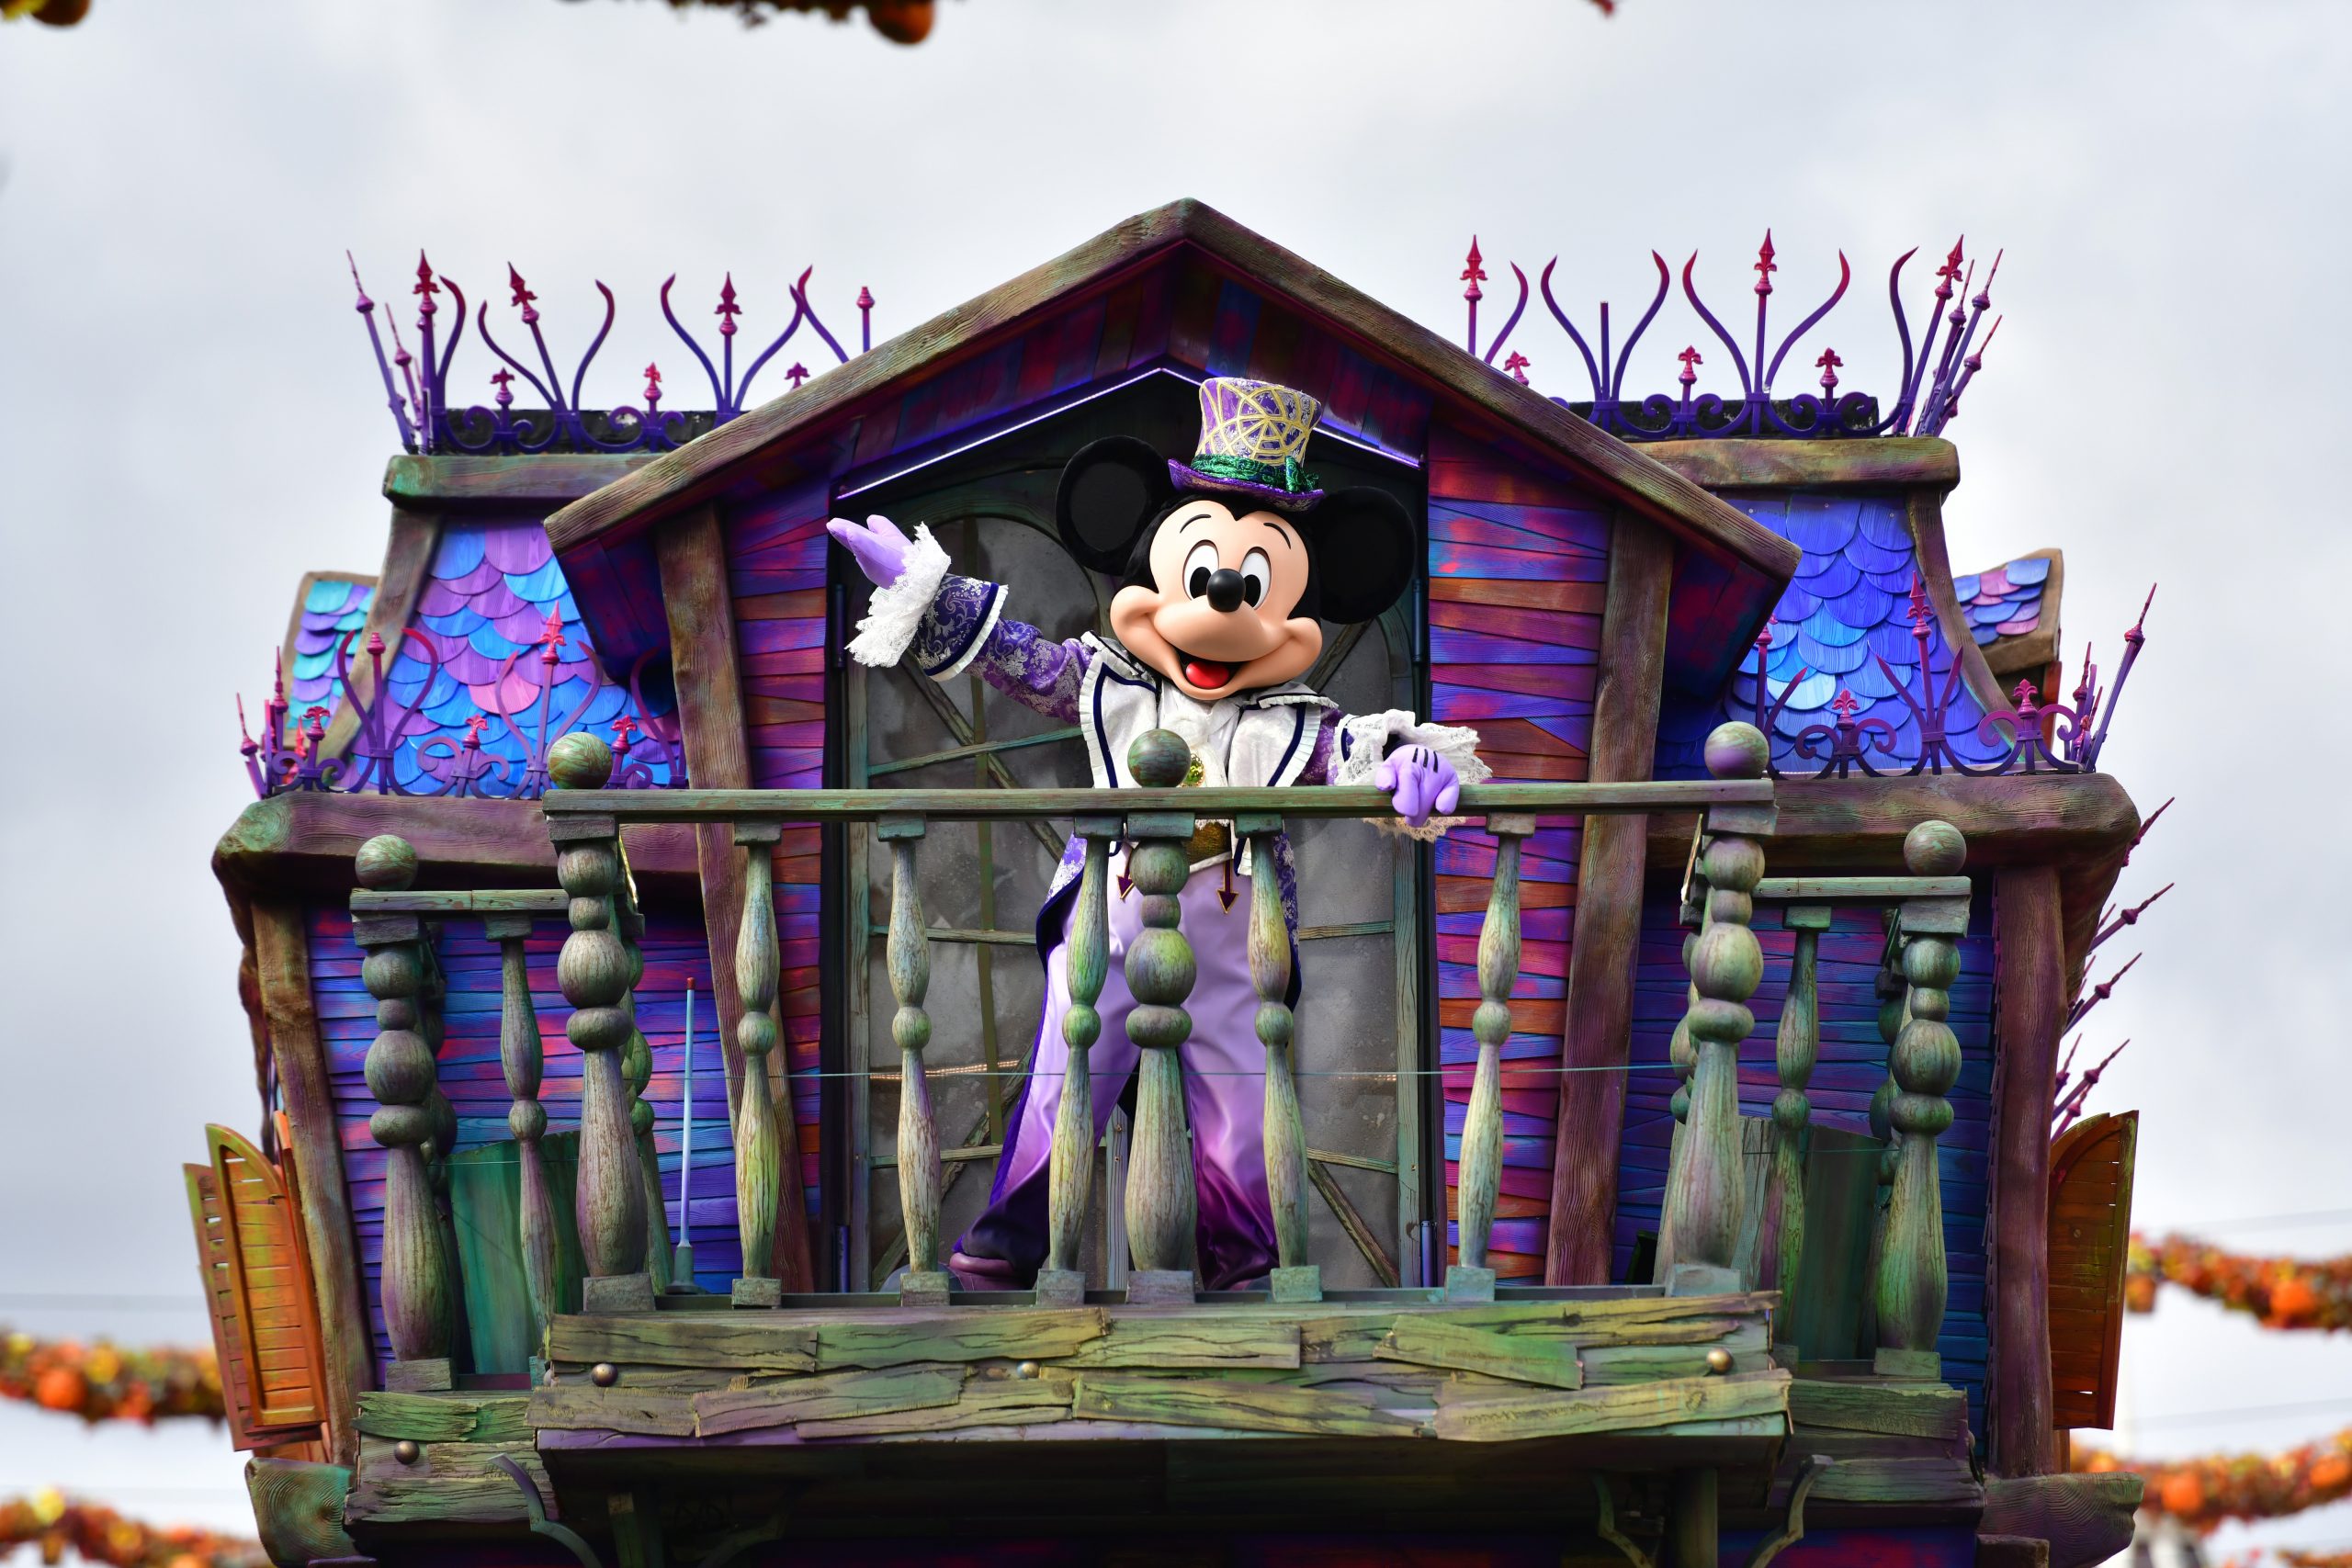 Boo! The Halloween Festival returns from October 1st to November 6th